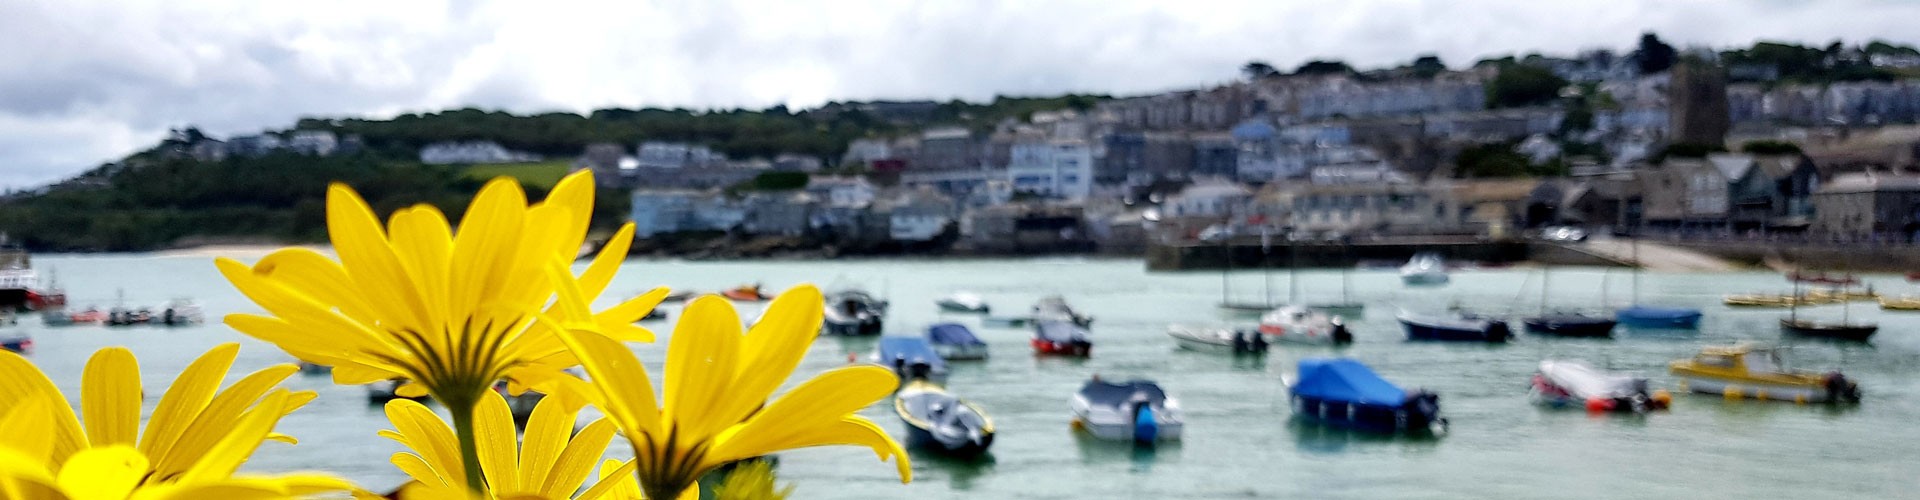 st ives bay with flowers in foreground